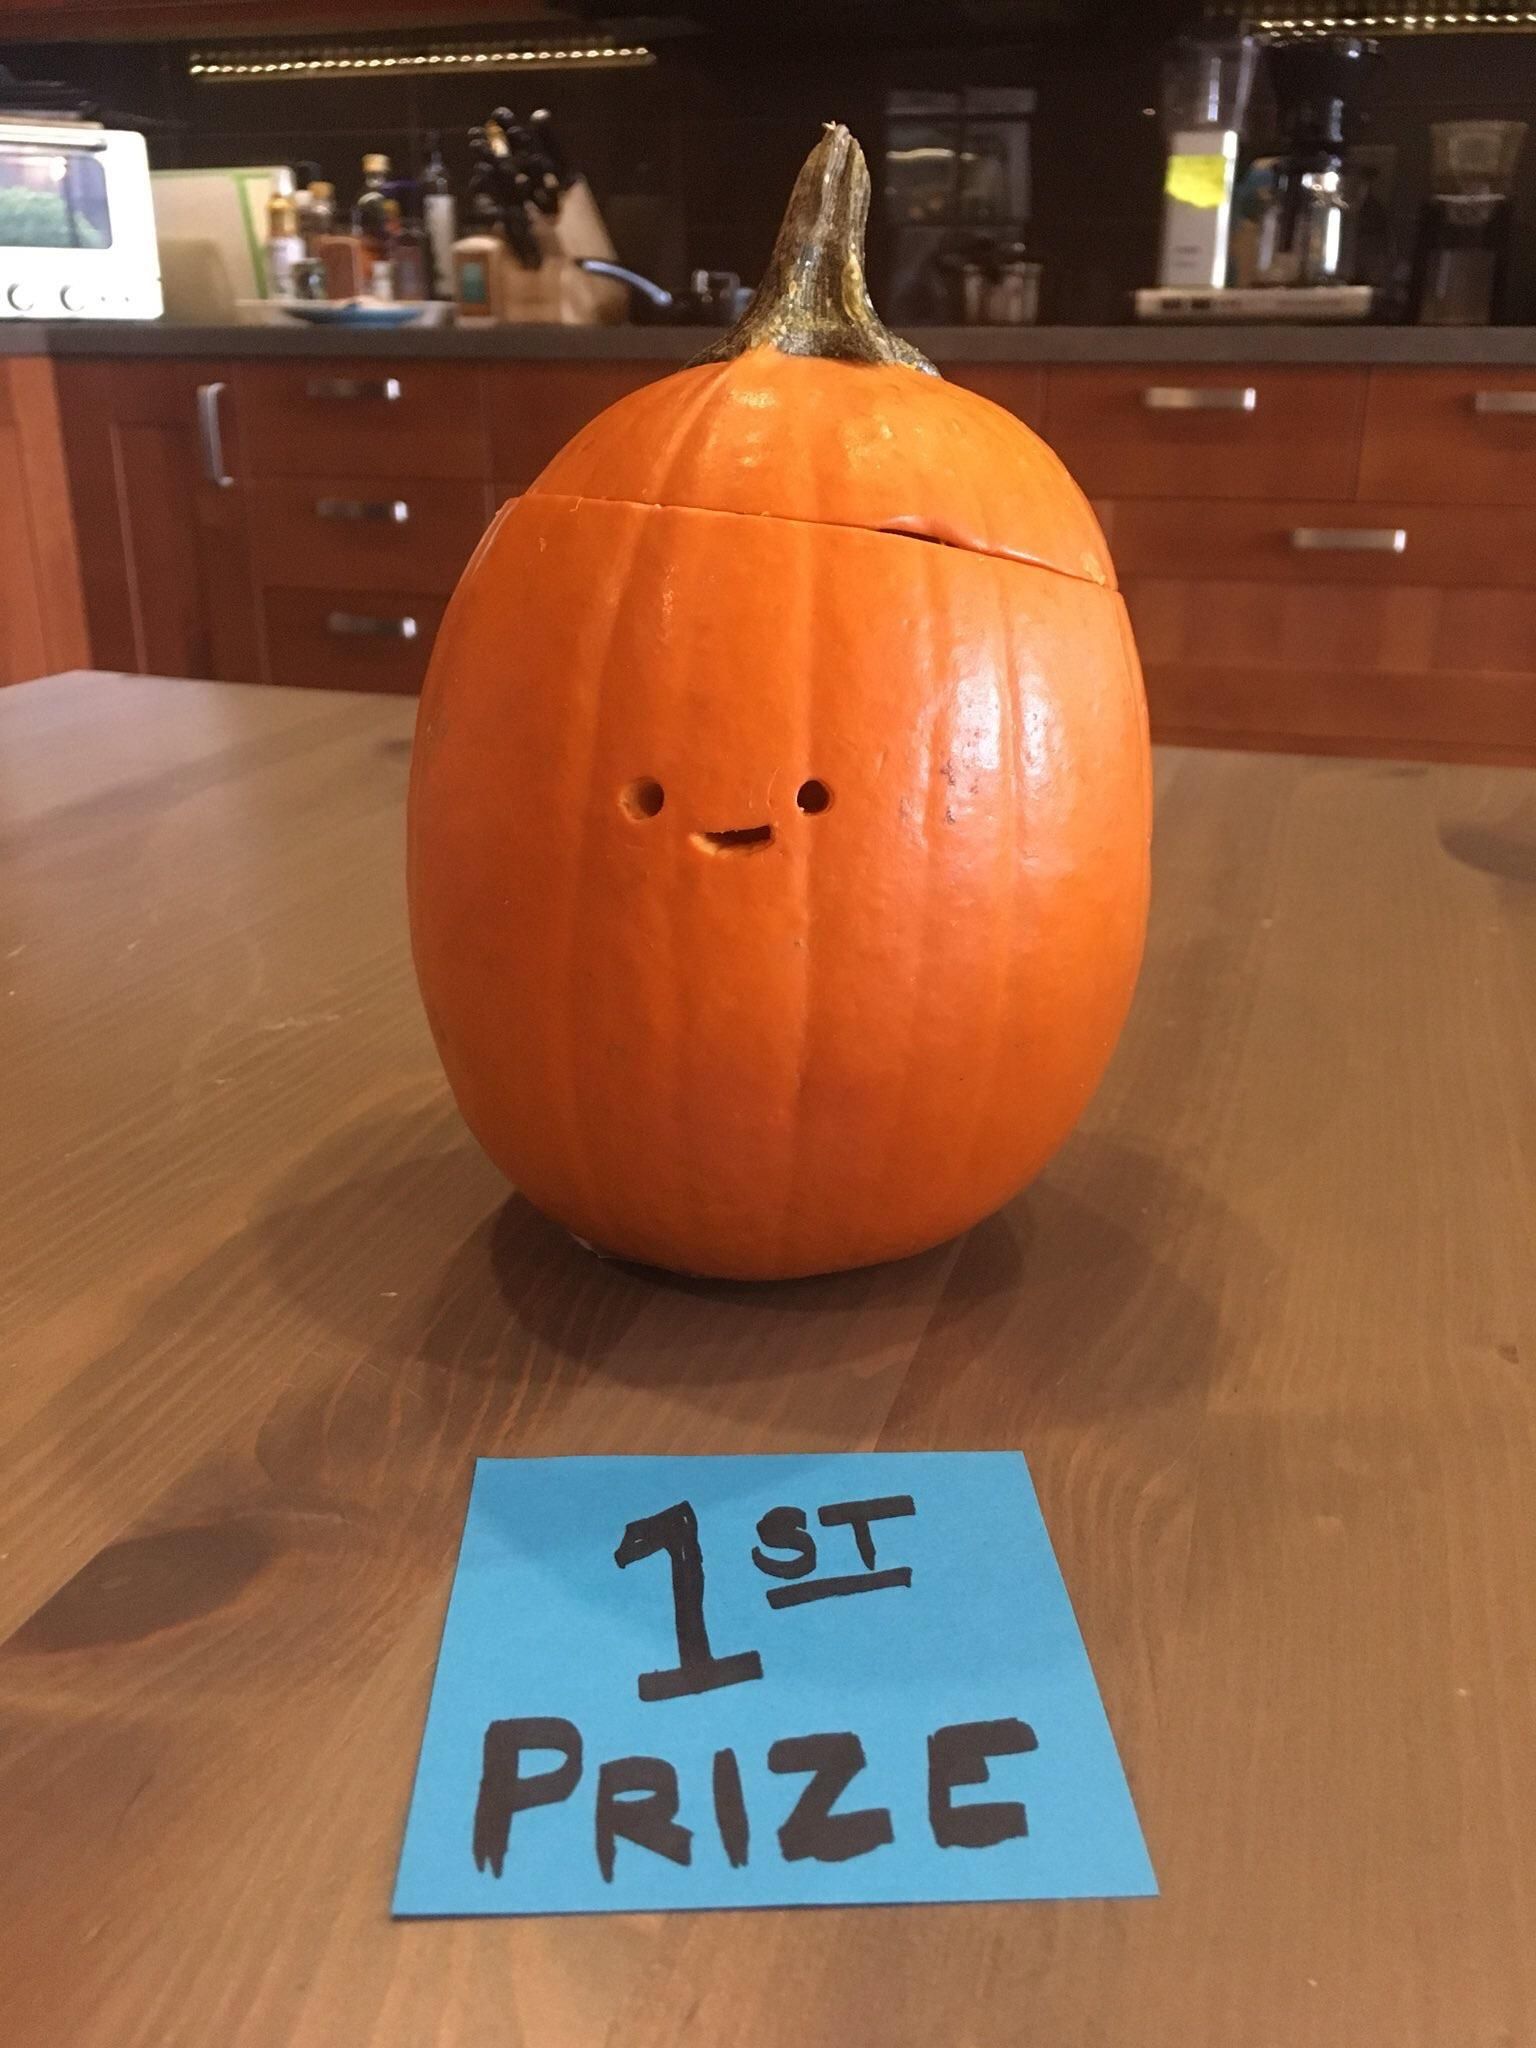 Animation company w/ top animators, this pumpkin won their carving competition